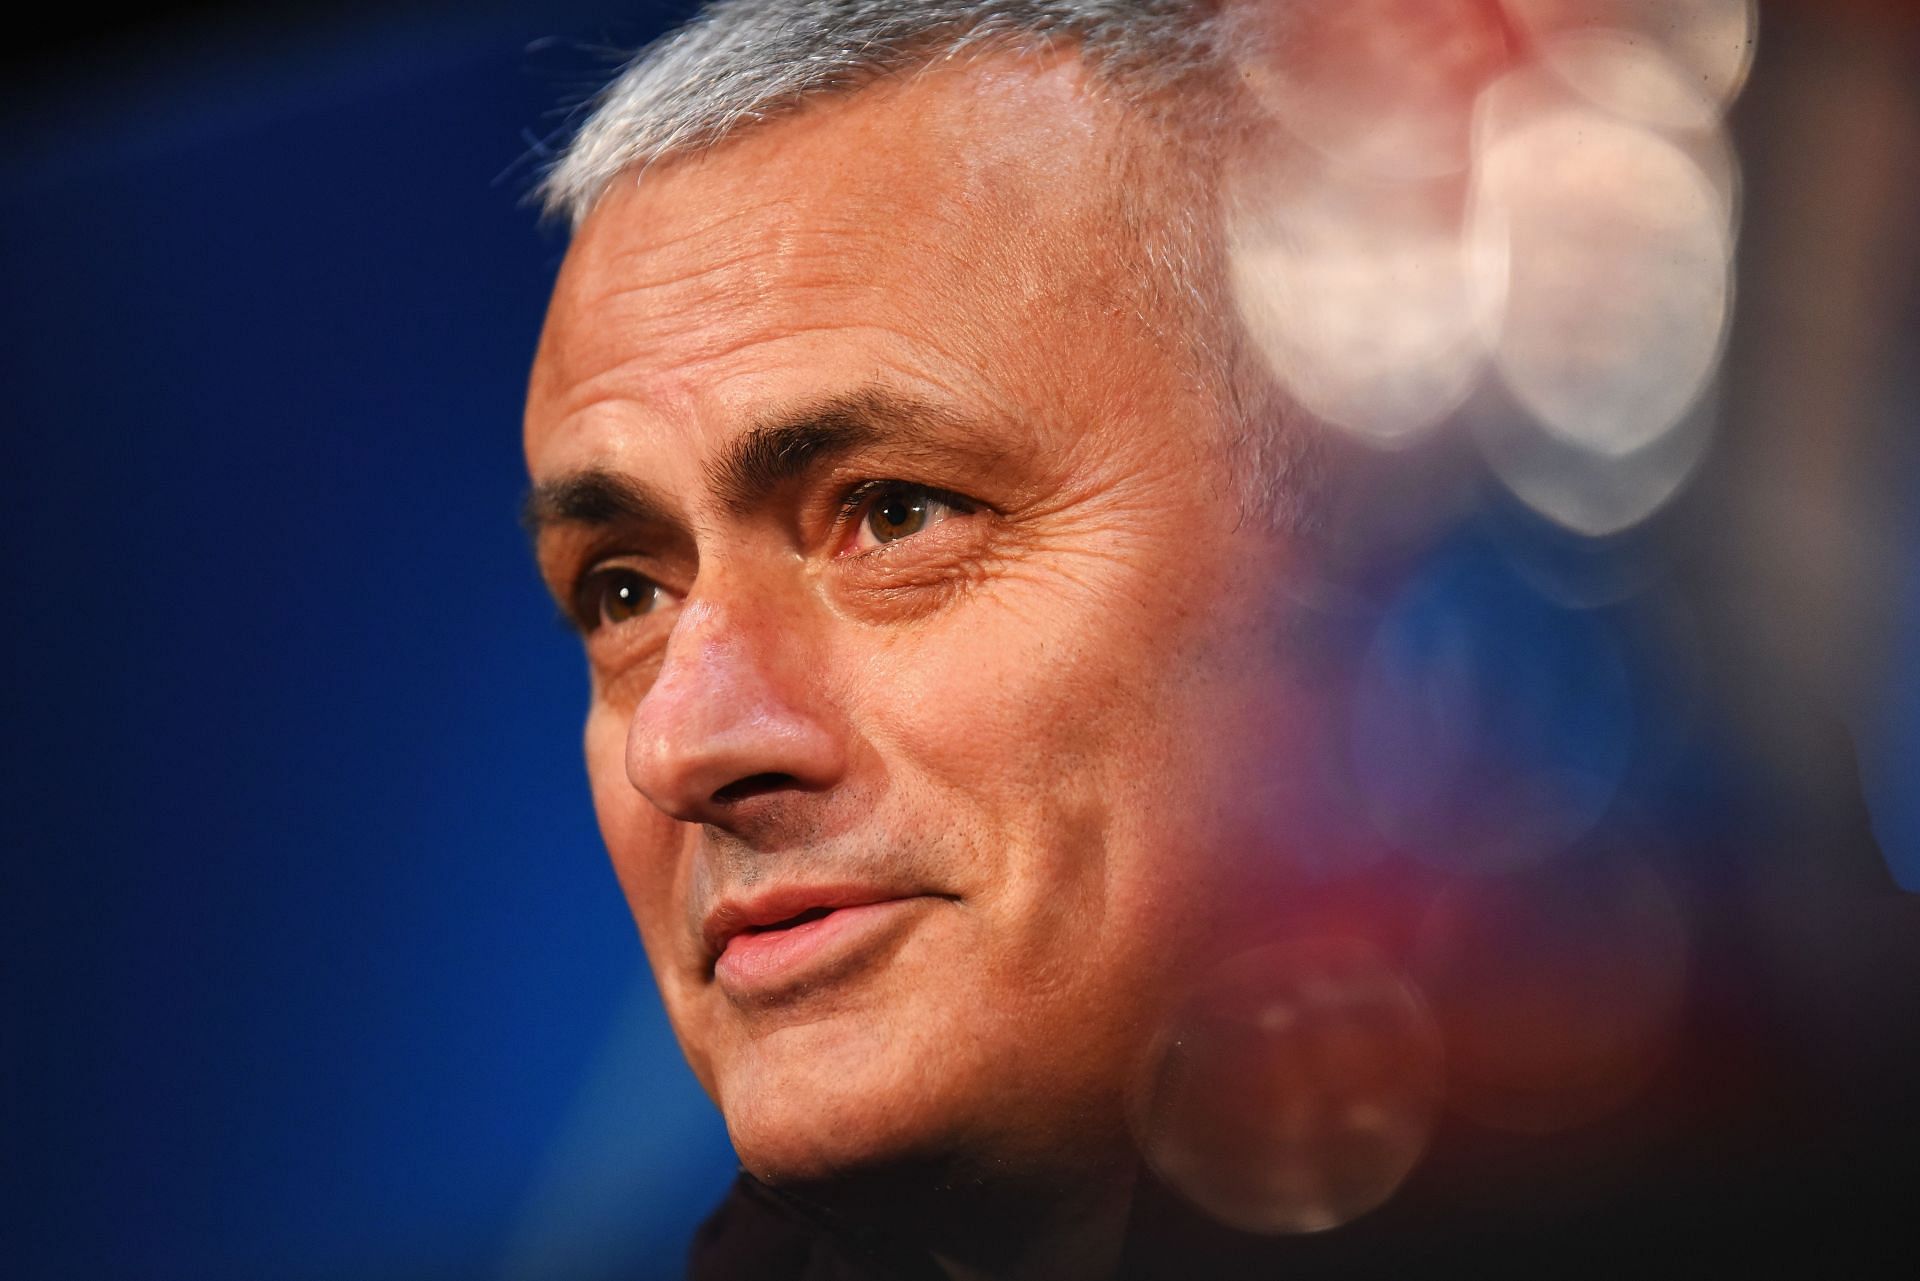 Jose Mourinho has been linked with a move to Chelsea and PSG.